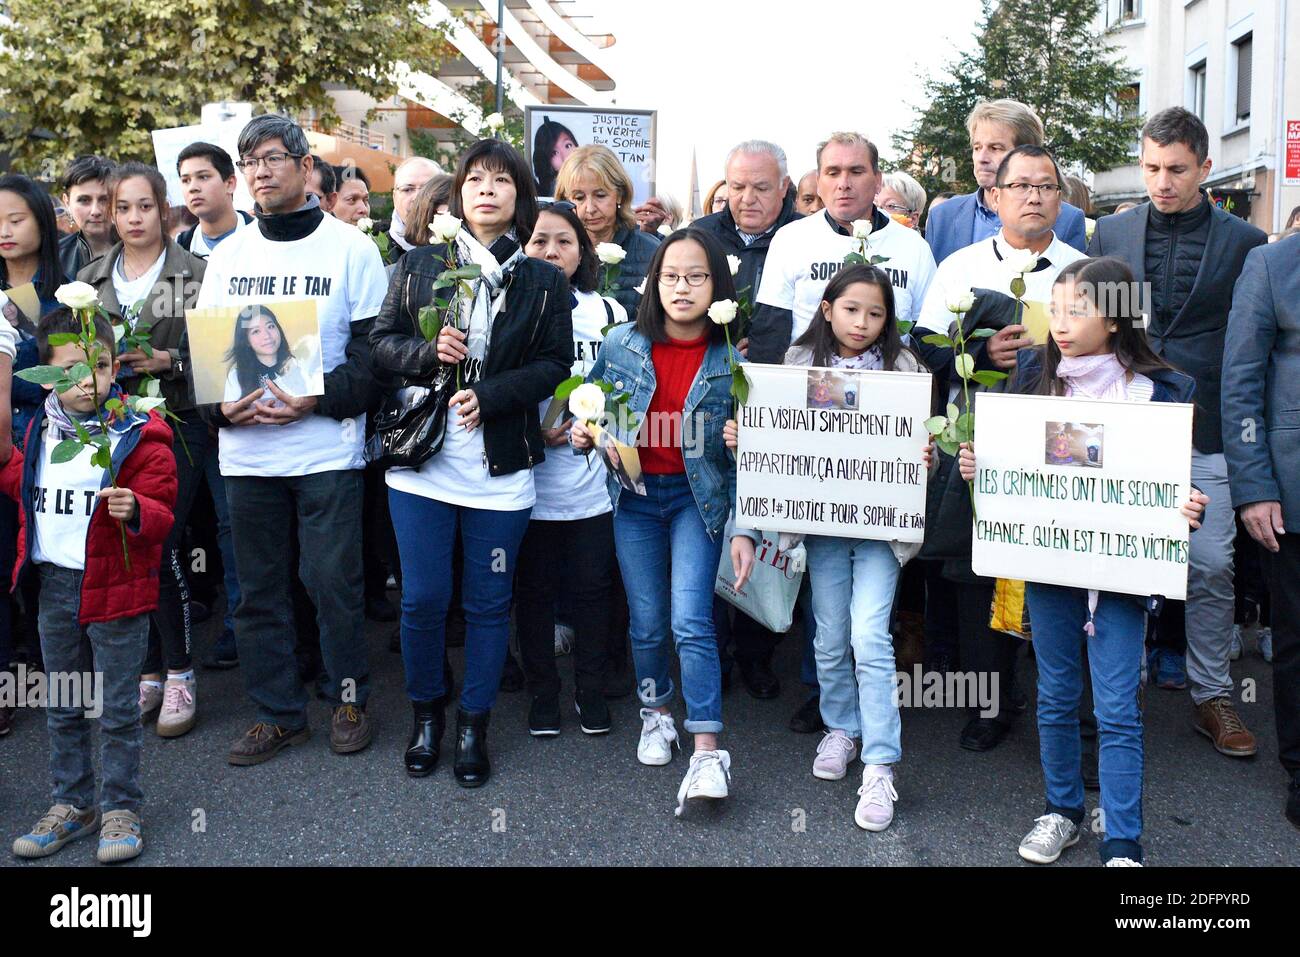 People gather for a white march in support of Sophie le Tan's family in  Schiltigheim, a suburb of Strasbourg, France, September 29, 2018. Jean-Marc  Reiser, a 58-year-old man with a heavy criminal